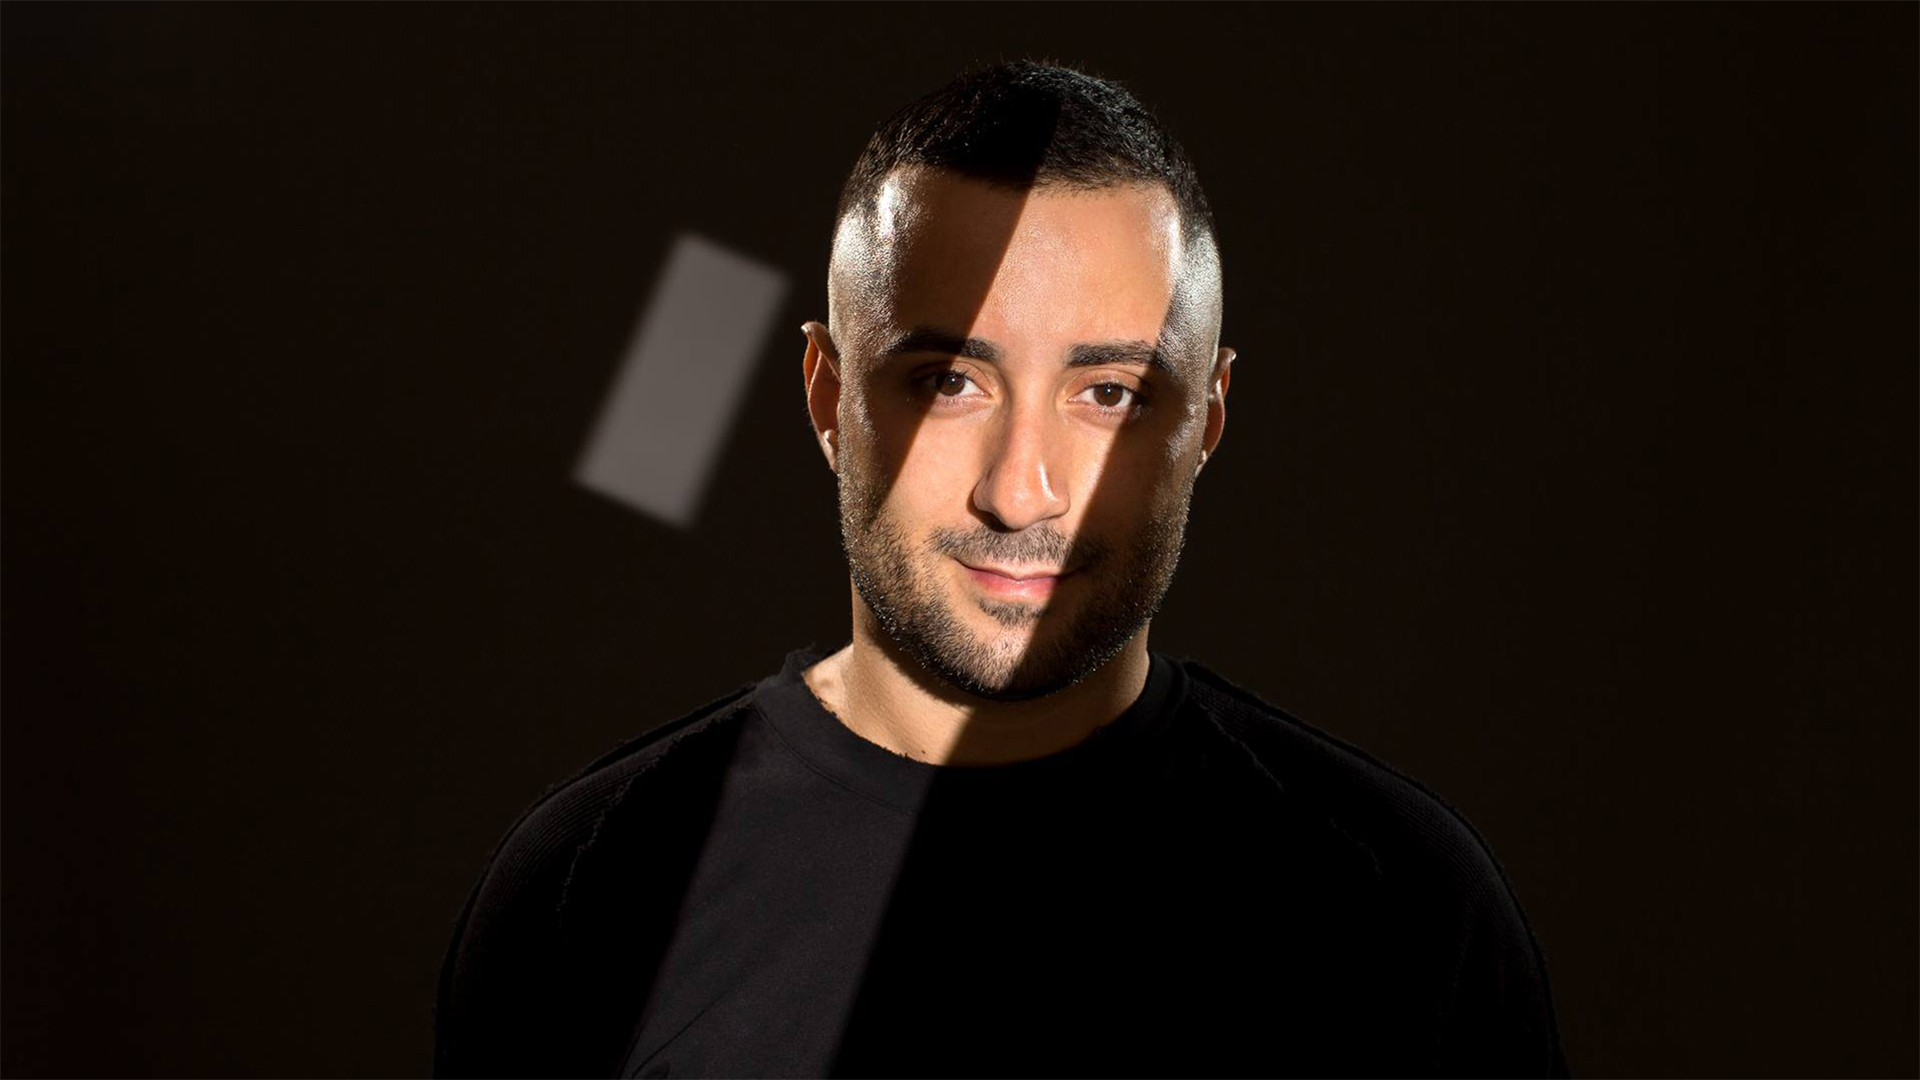 Joseph Capriati  in serious condition after being stabbed (updated)